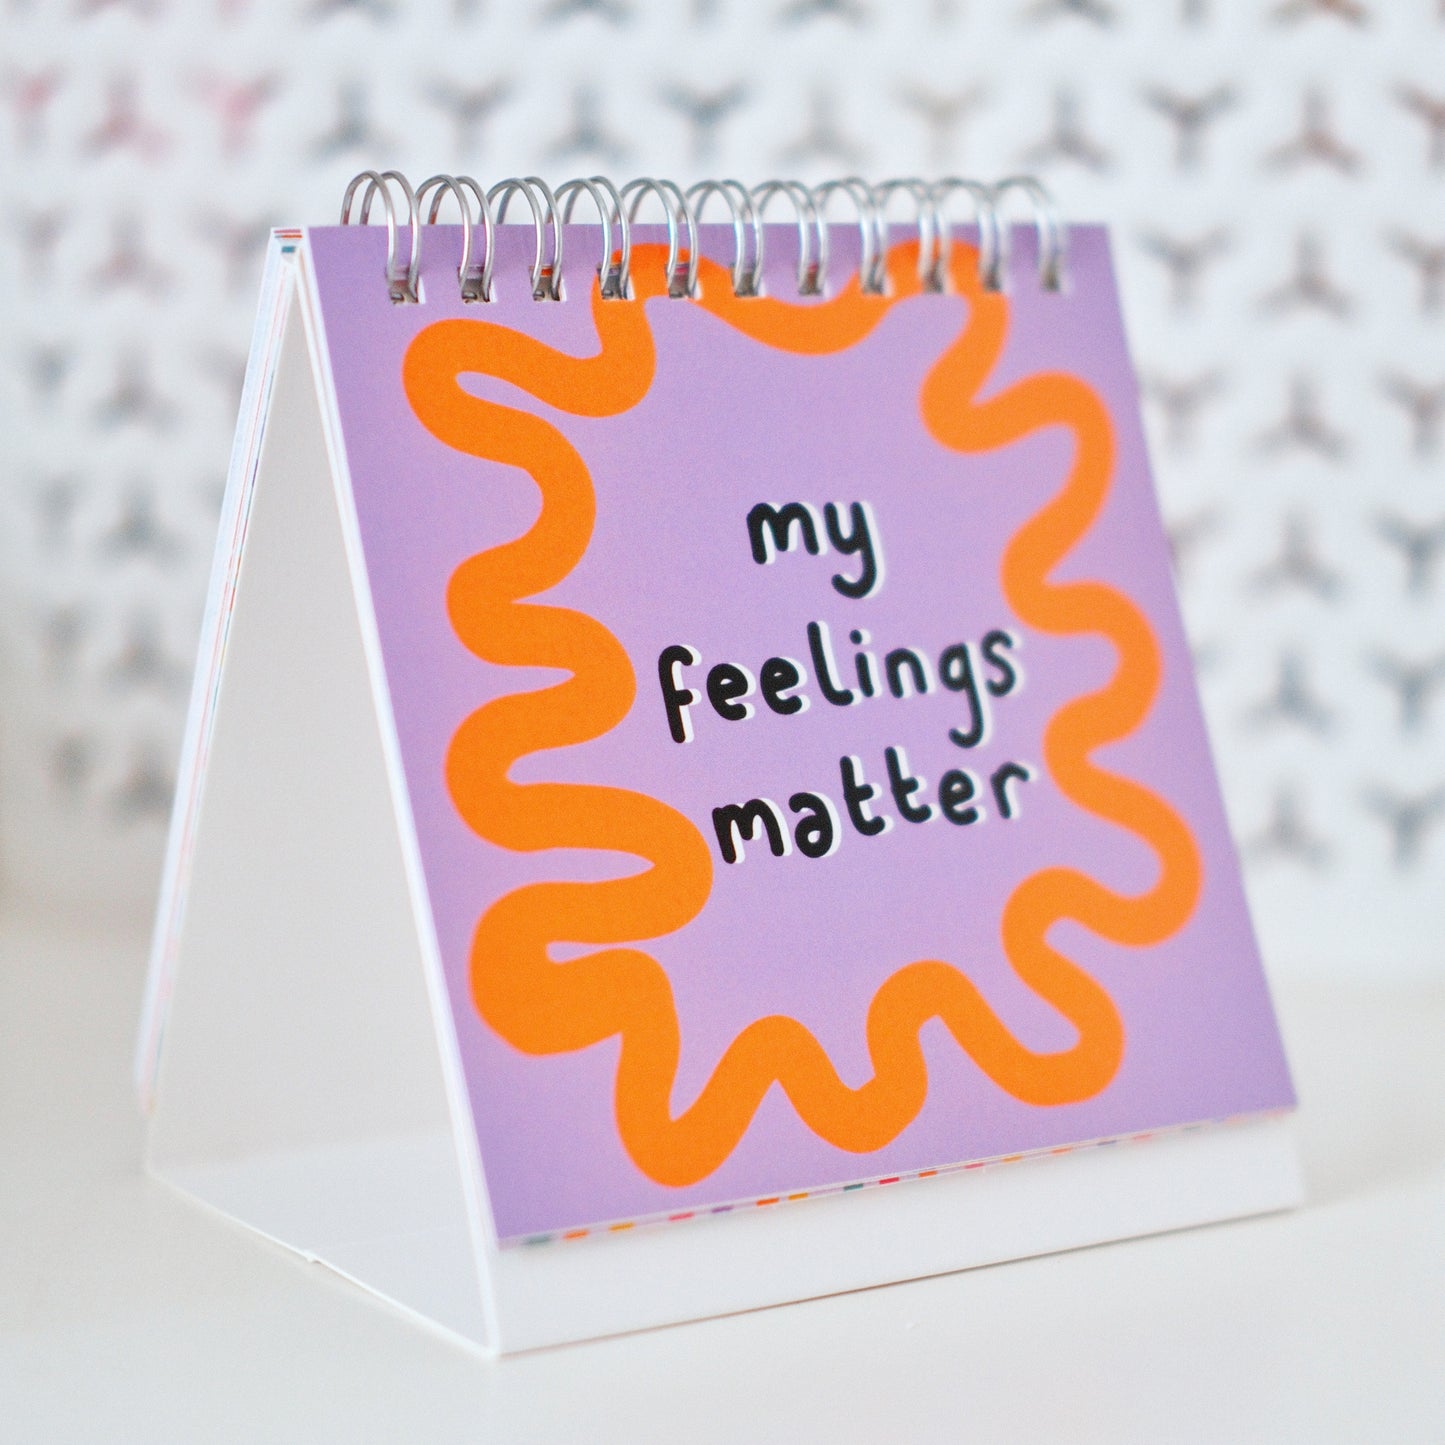 i am powerful - page-a-day affirmation easel